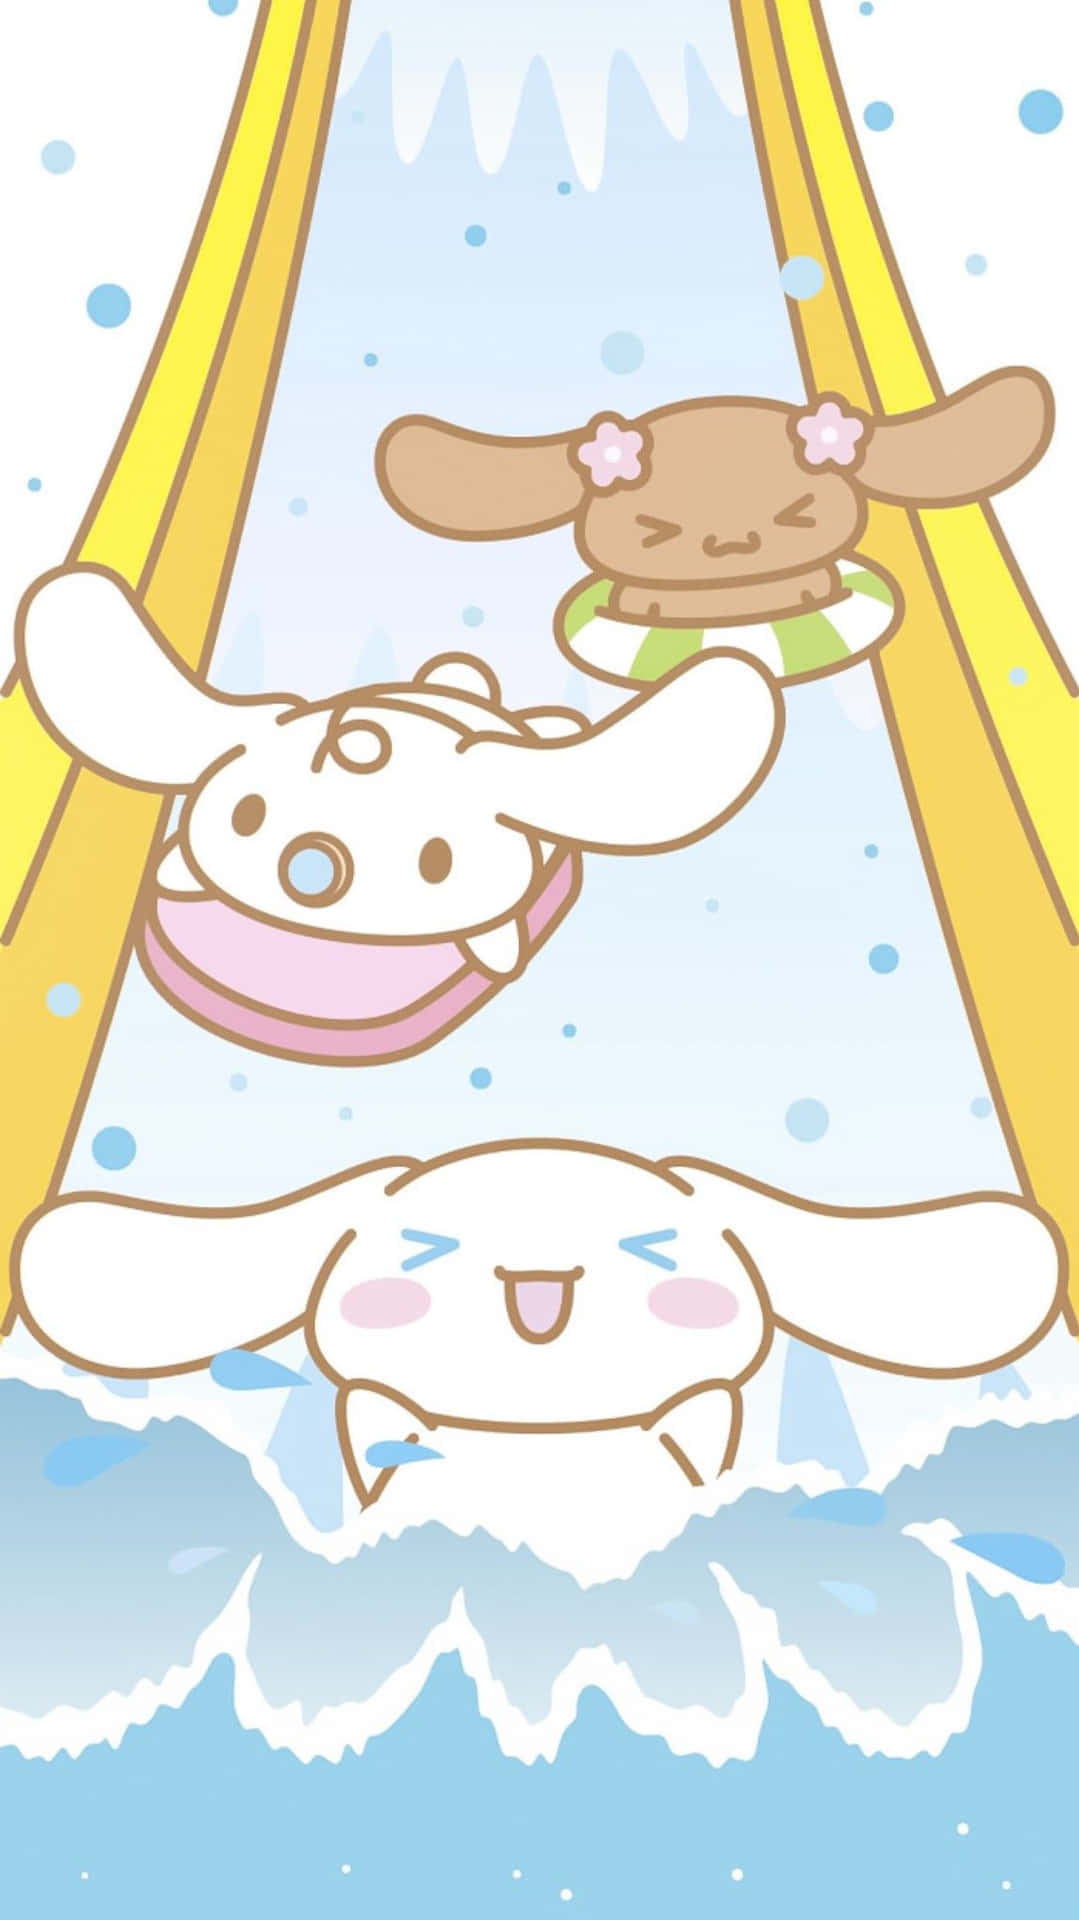 cinnamon roll and my melody wallpaper 2 peopleTikTok Search